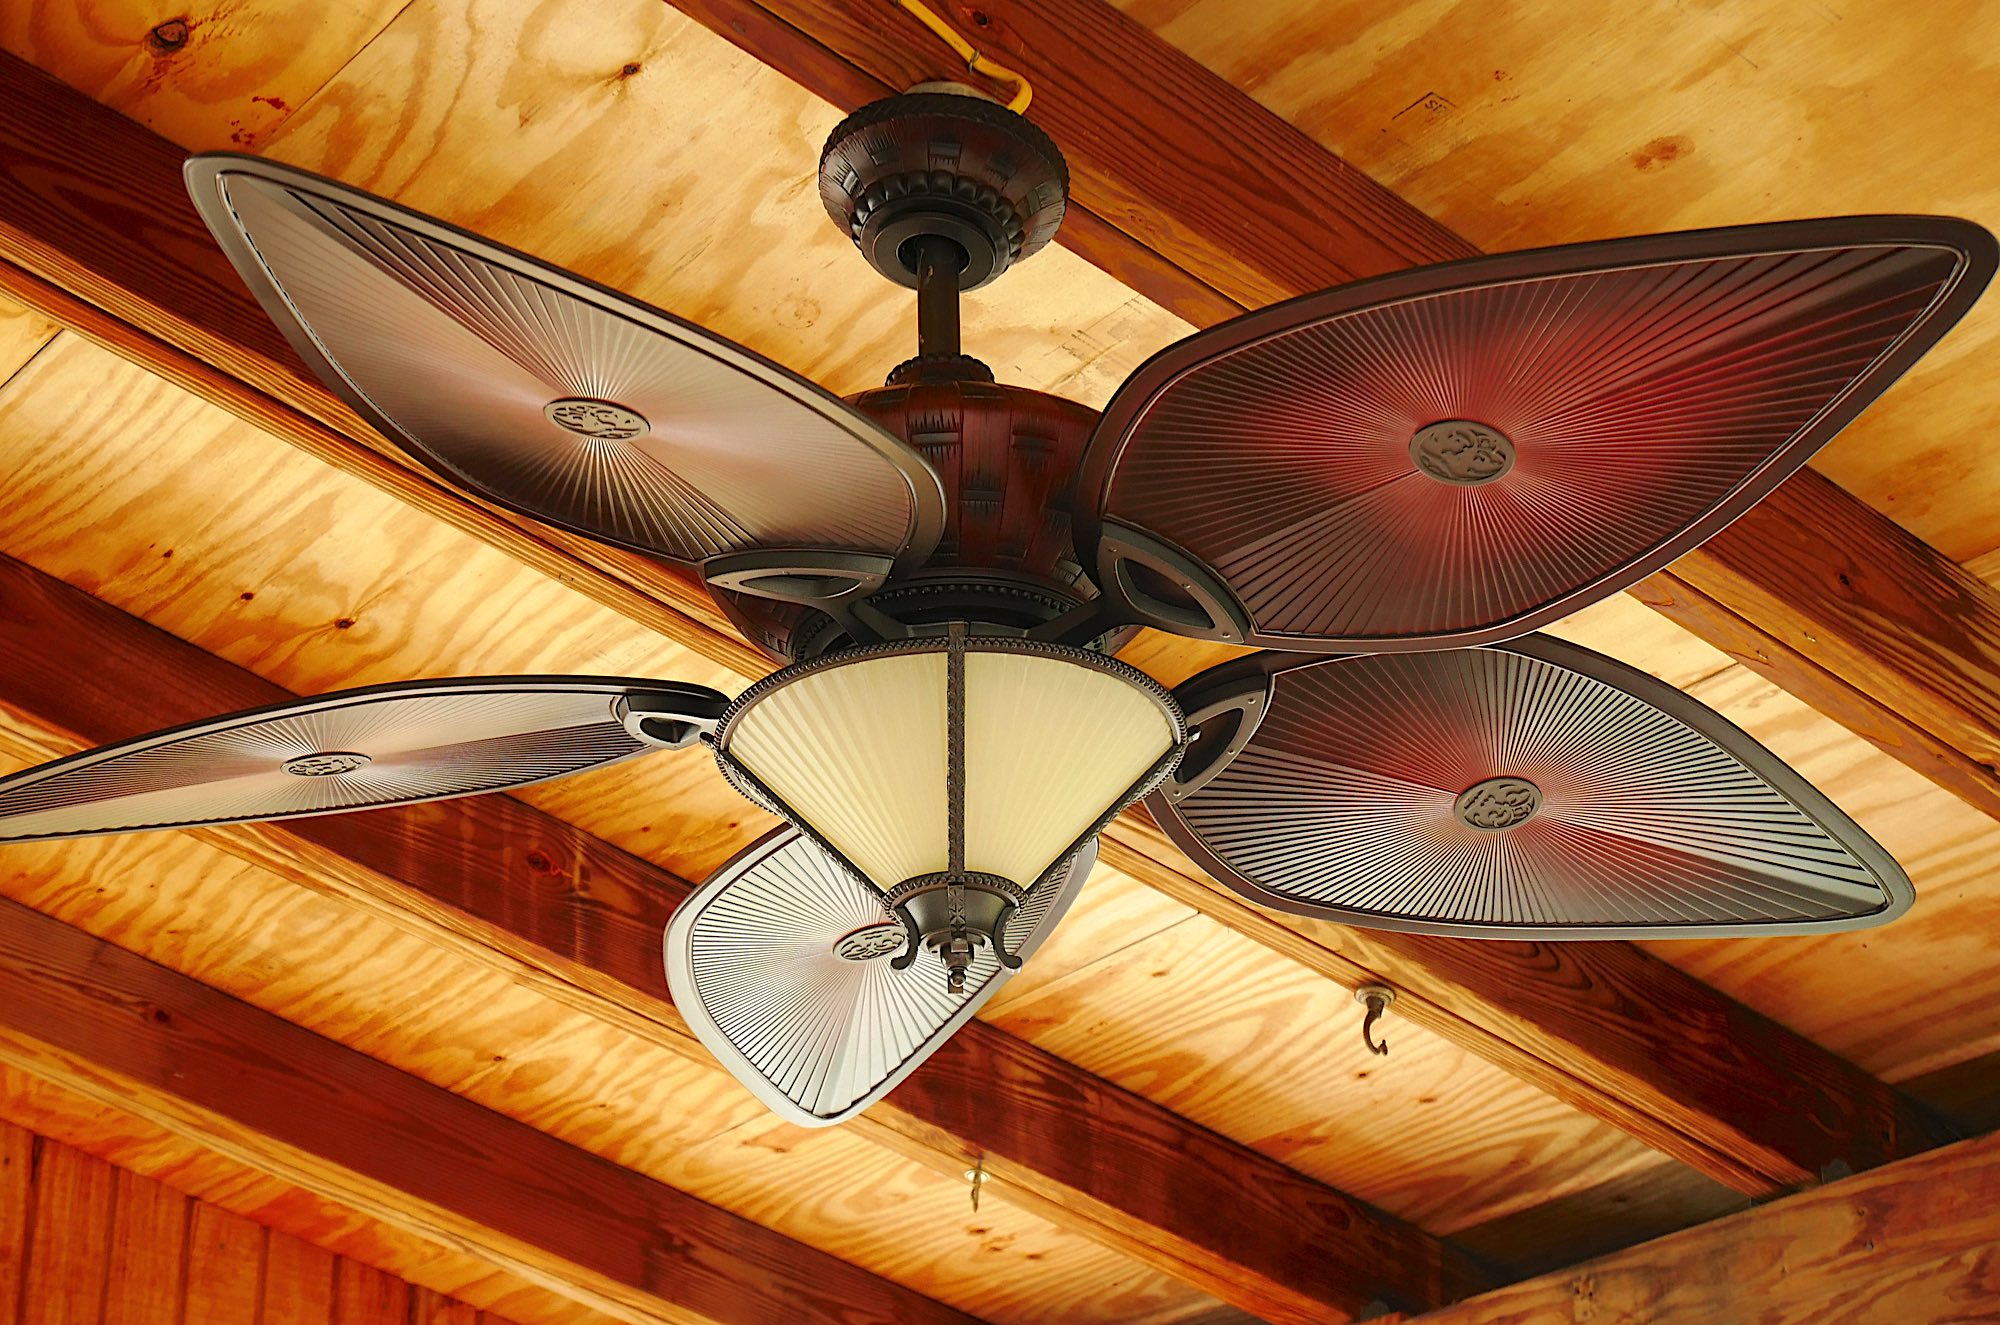 Lake Cowichan air conditioning and ceiling fans